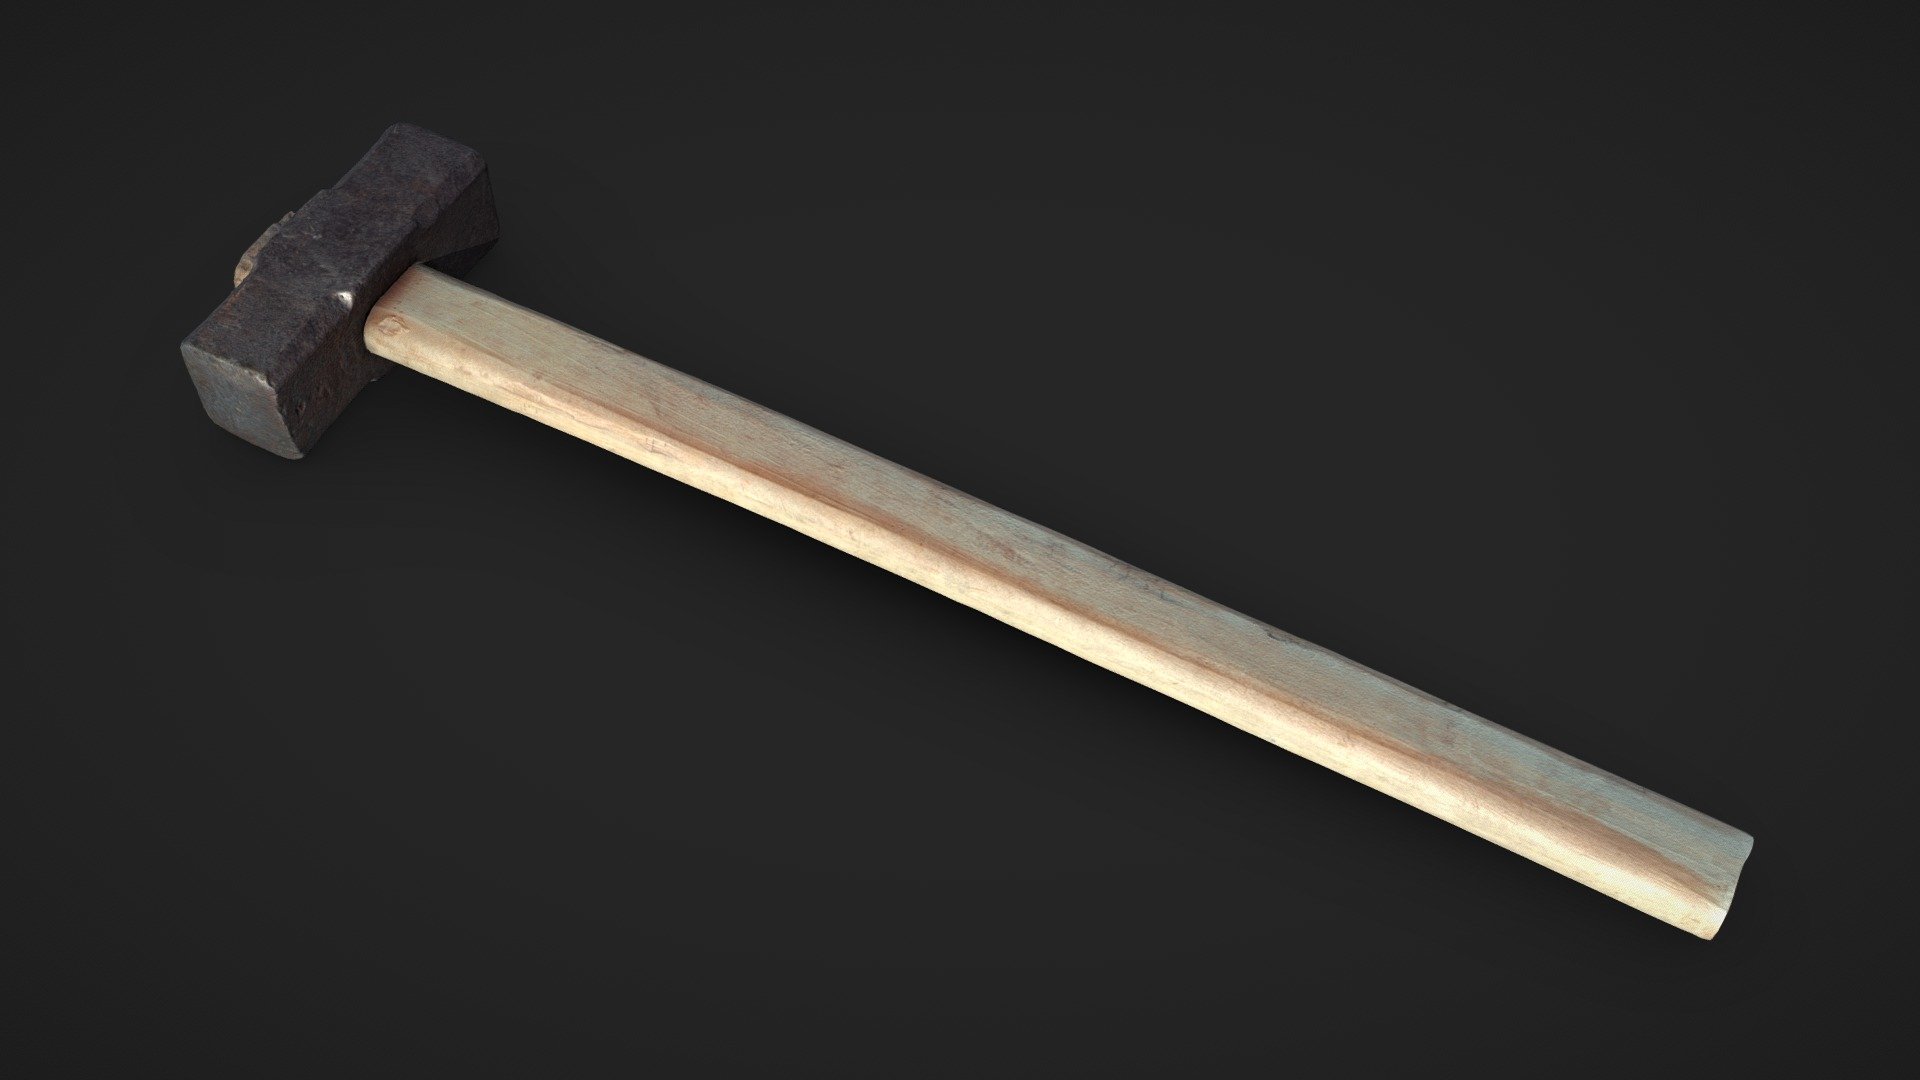 An old Sledgehammer with a wooden handle, which is perfect for creating an old forge.

Technical specifications:

Close-up scan model

Optimized model

non-overlapping UV map

ready for animation

PBR textures 4K resolution: Normal, Roughness, Albedo, Metal, Ambient Occlusion maps

Download package includes FBX, OBJ which are applicable for 3ds Max, Maya, Unreal Engine, Unity, Blender.

Enjoy! - Sledgehammer - Buy Royalty Free 3D model by U3DA (@unreal.artists) 3d model